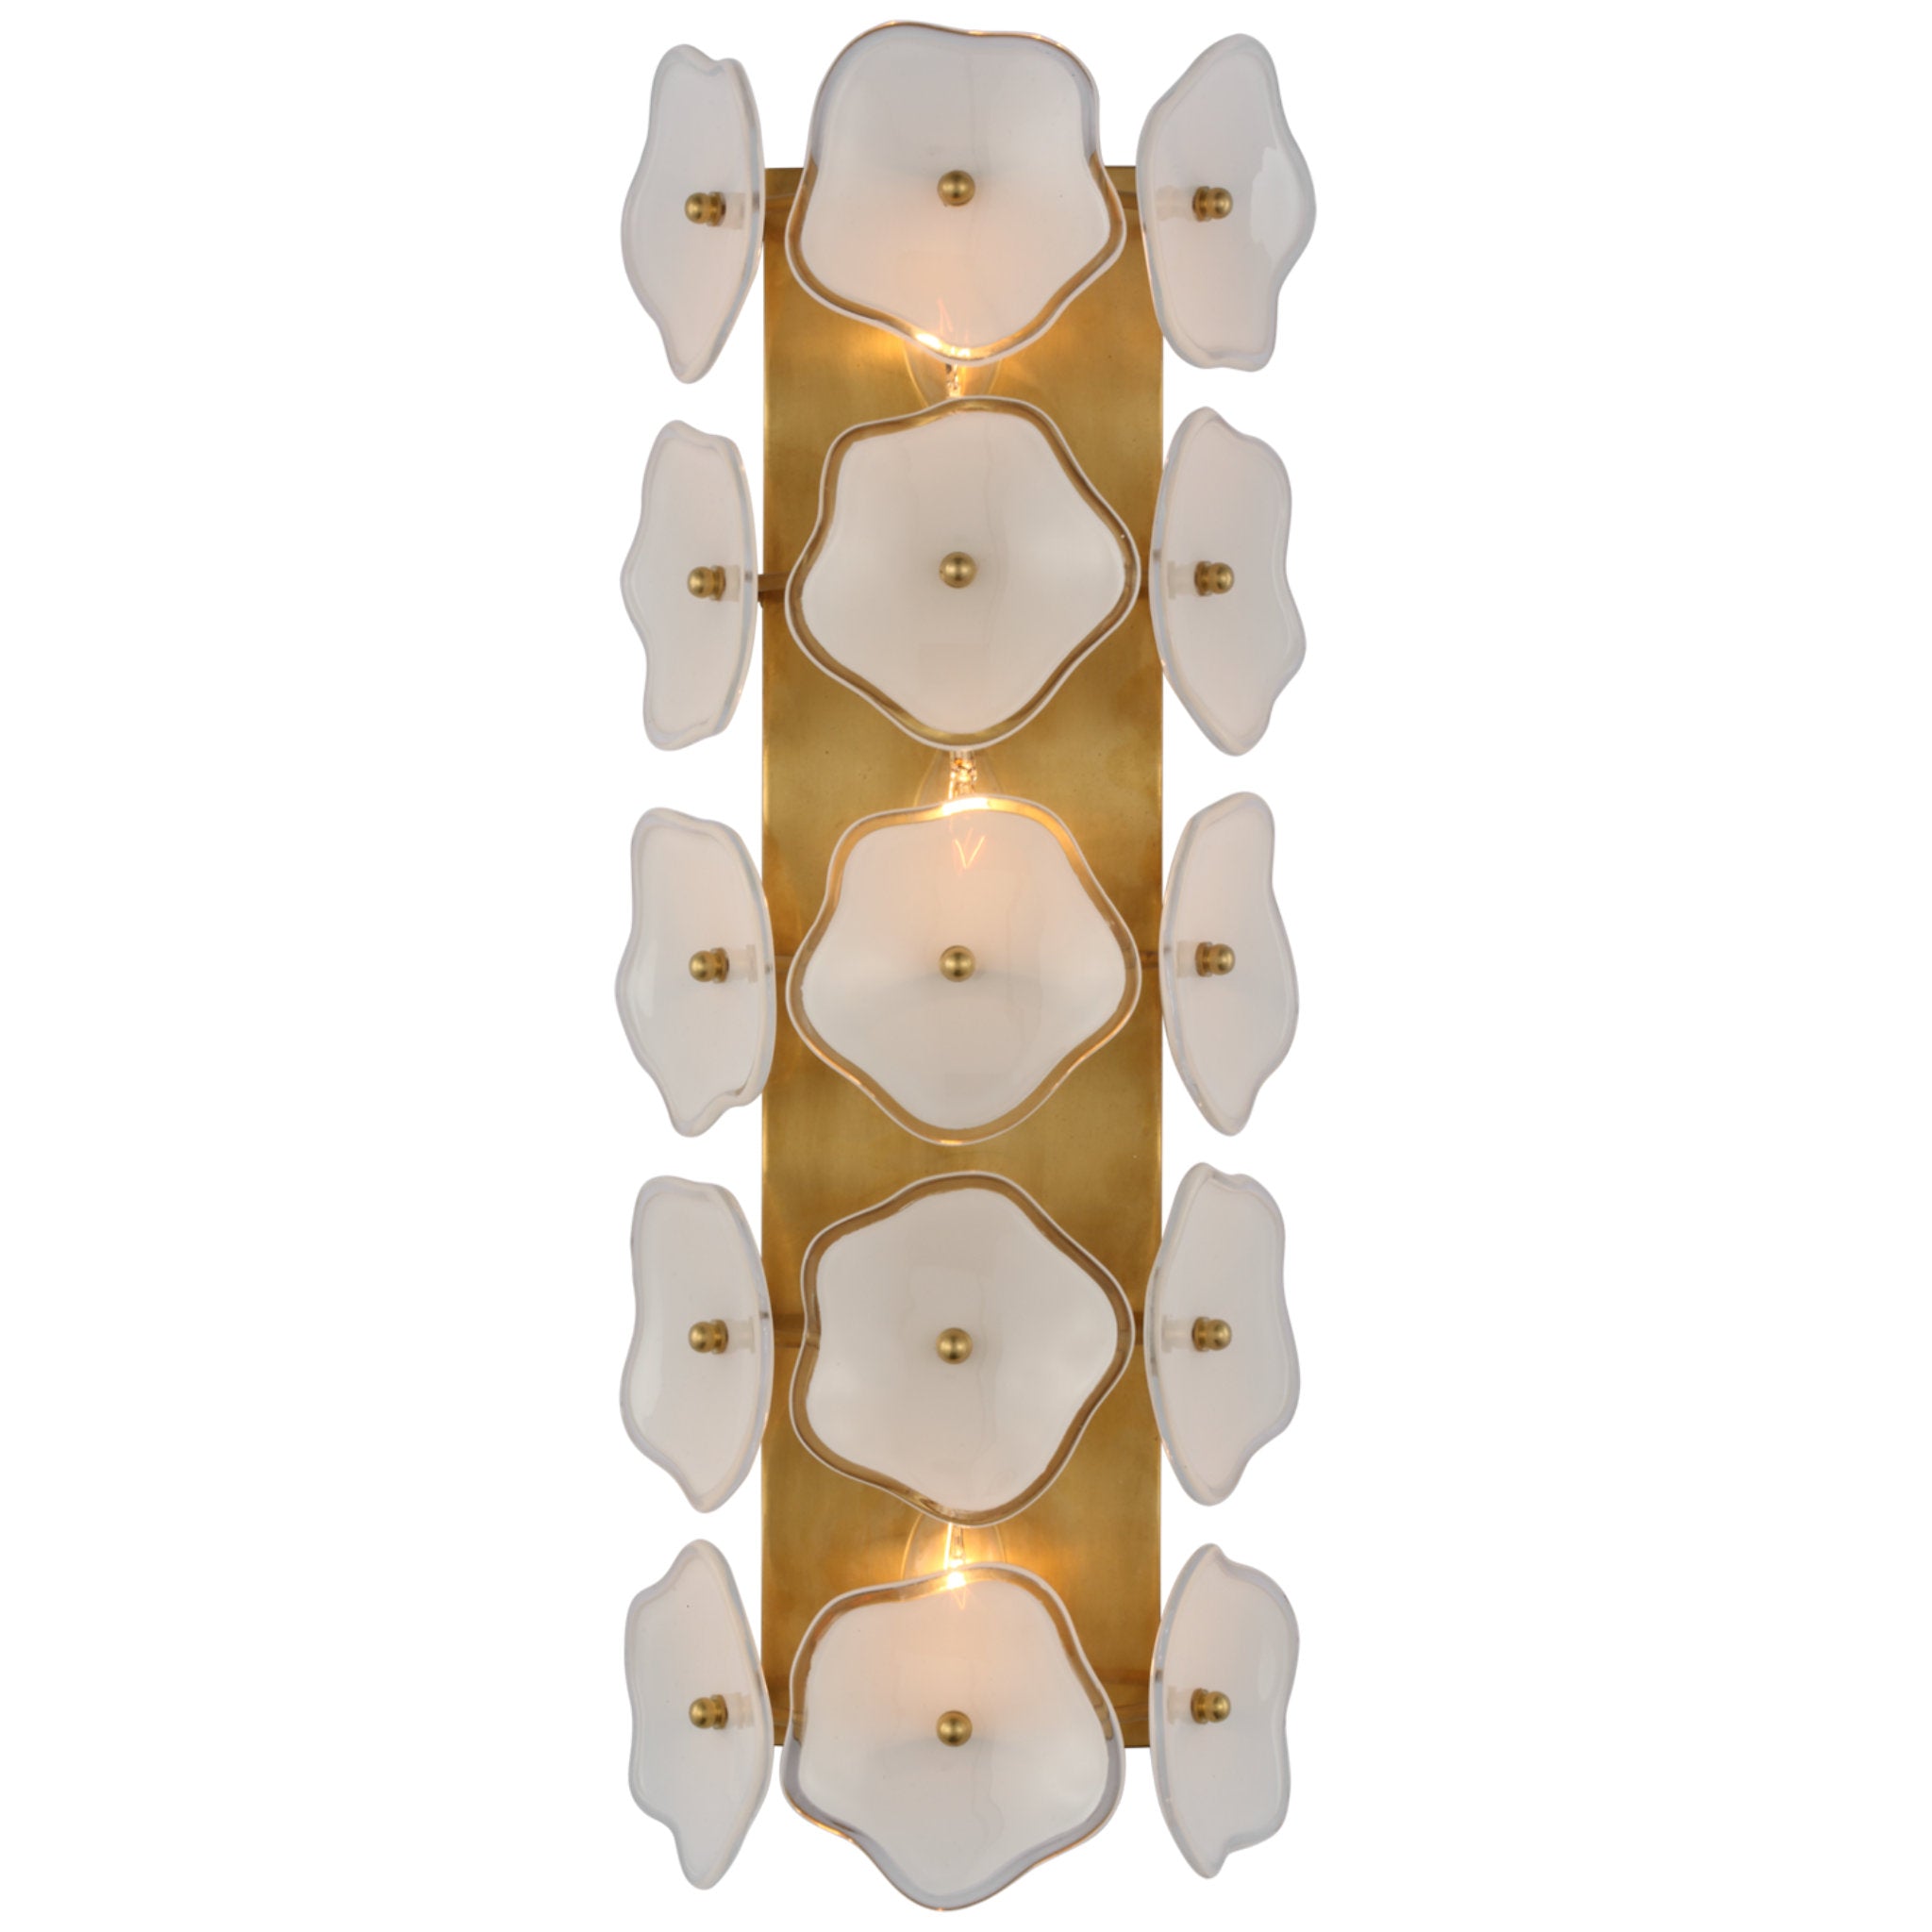 kate spade new york Lloyd Large Jeweled Sconce in Soft Brass with Alab